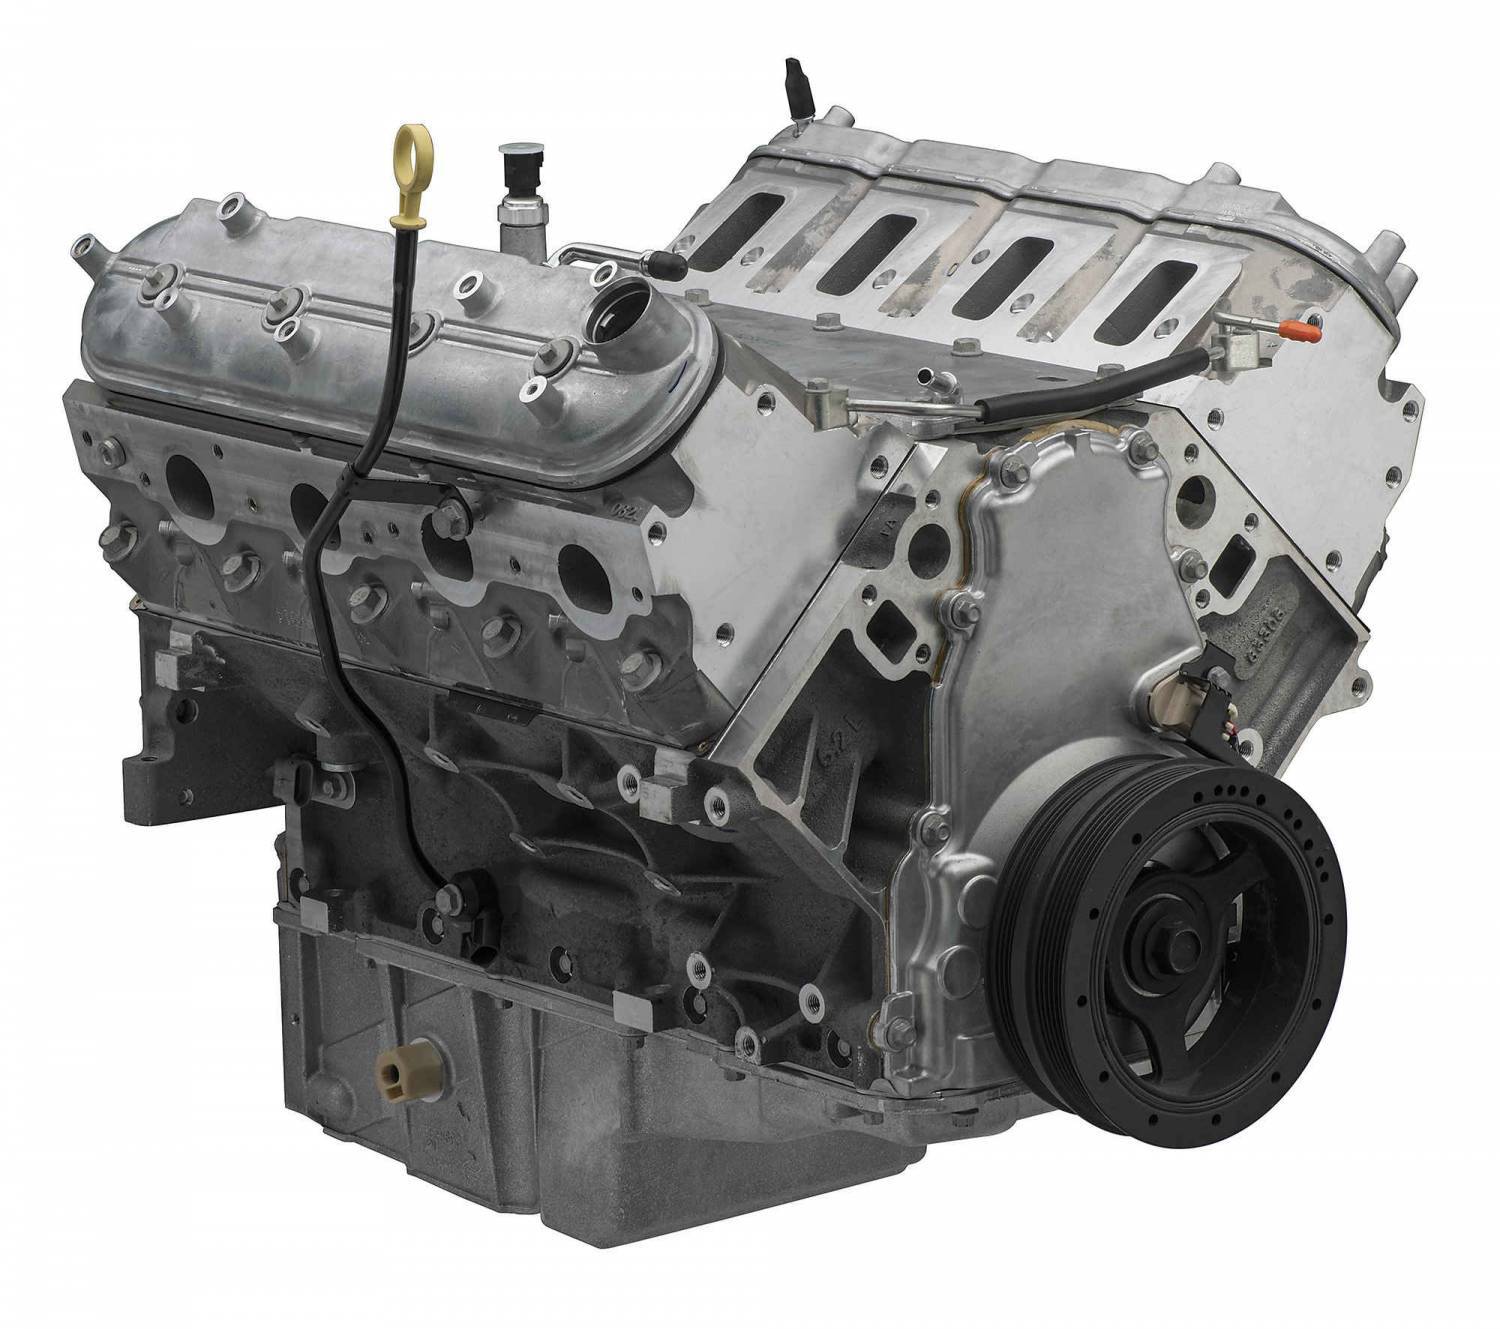 Chevrolet Performance Chev LS3 Long Crate Engine 495hp # 19434646